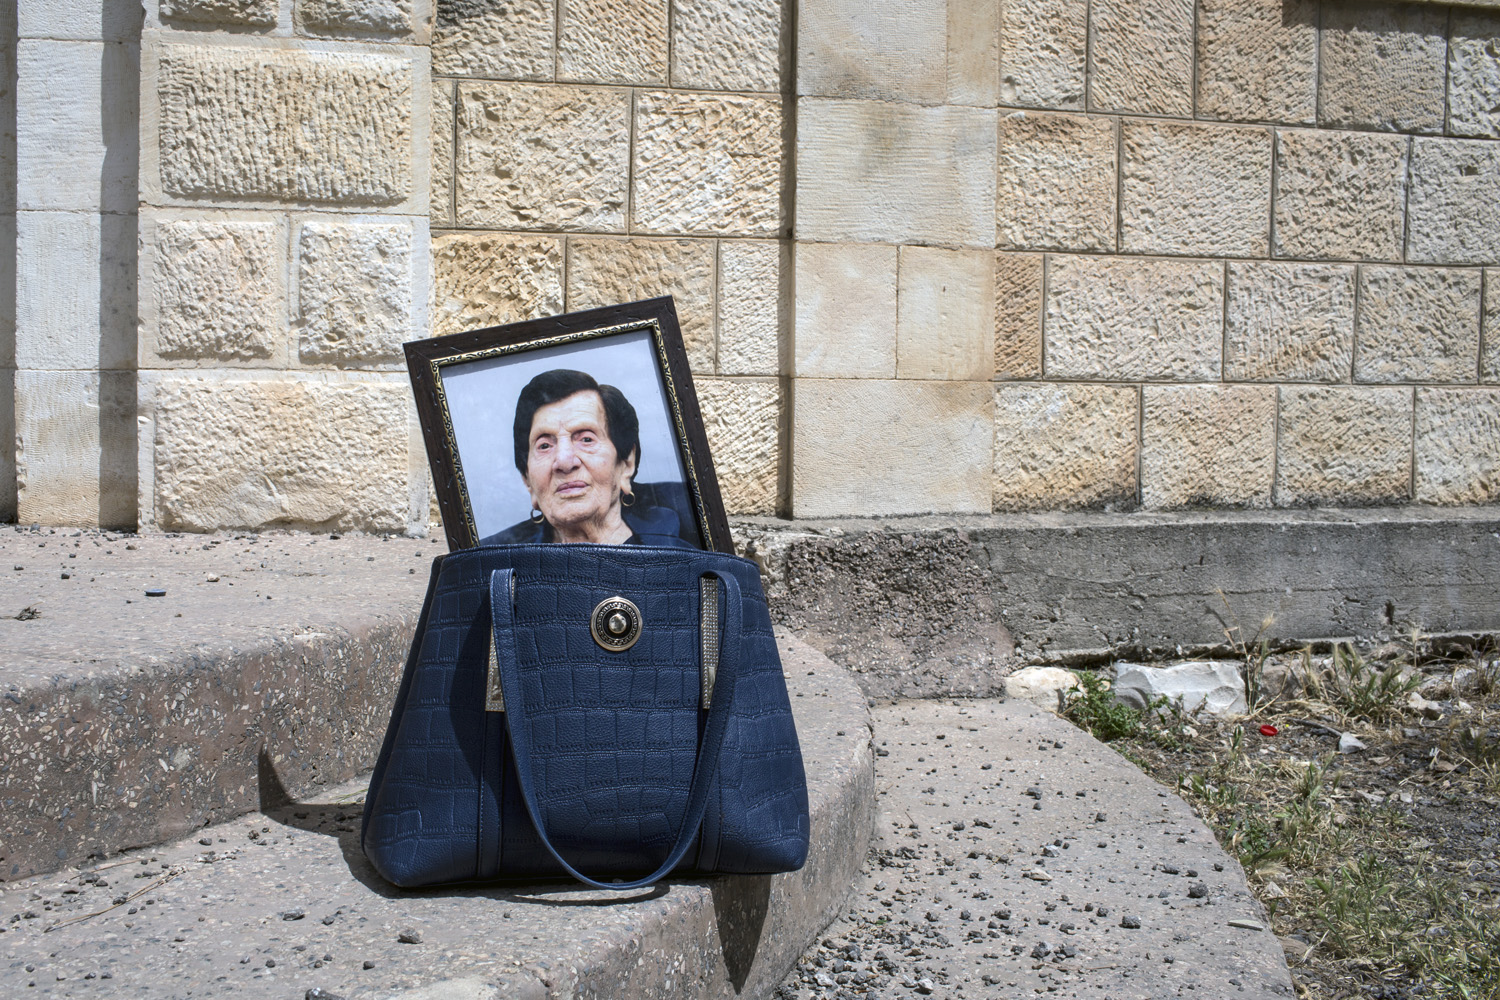 Palestinian mother carries her dead mother's portrait in a bag by Tanya Habjouqa